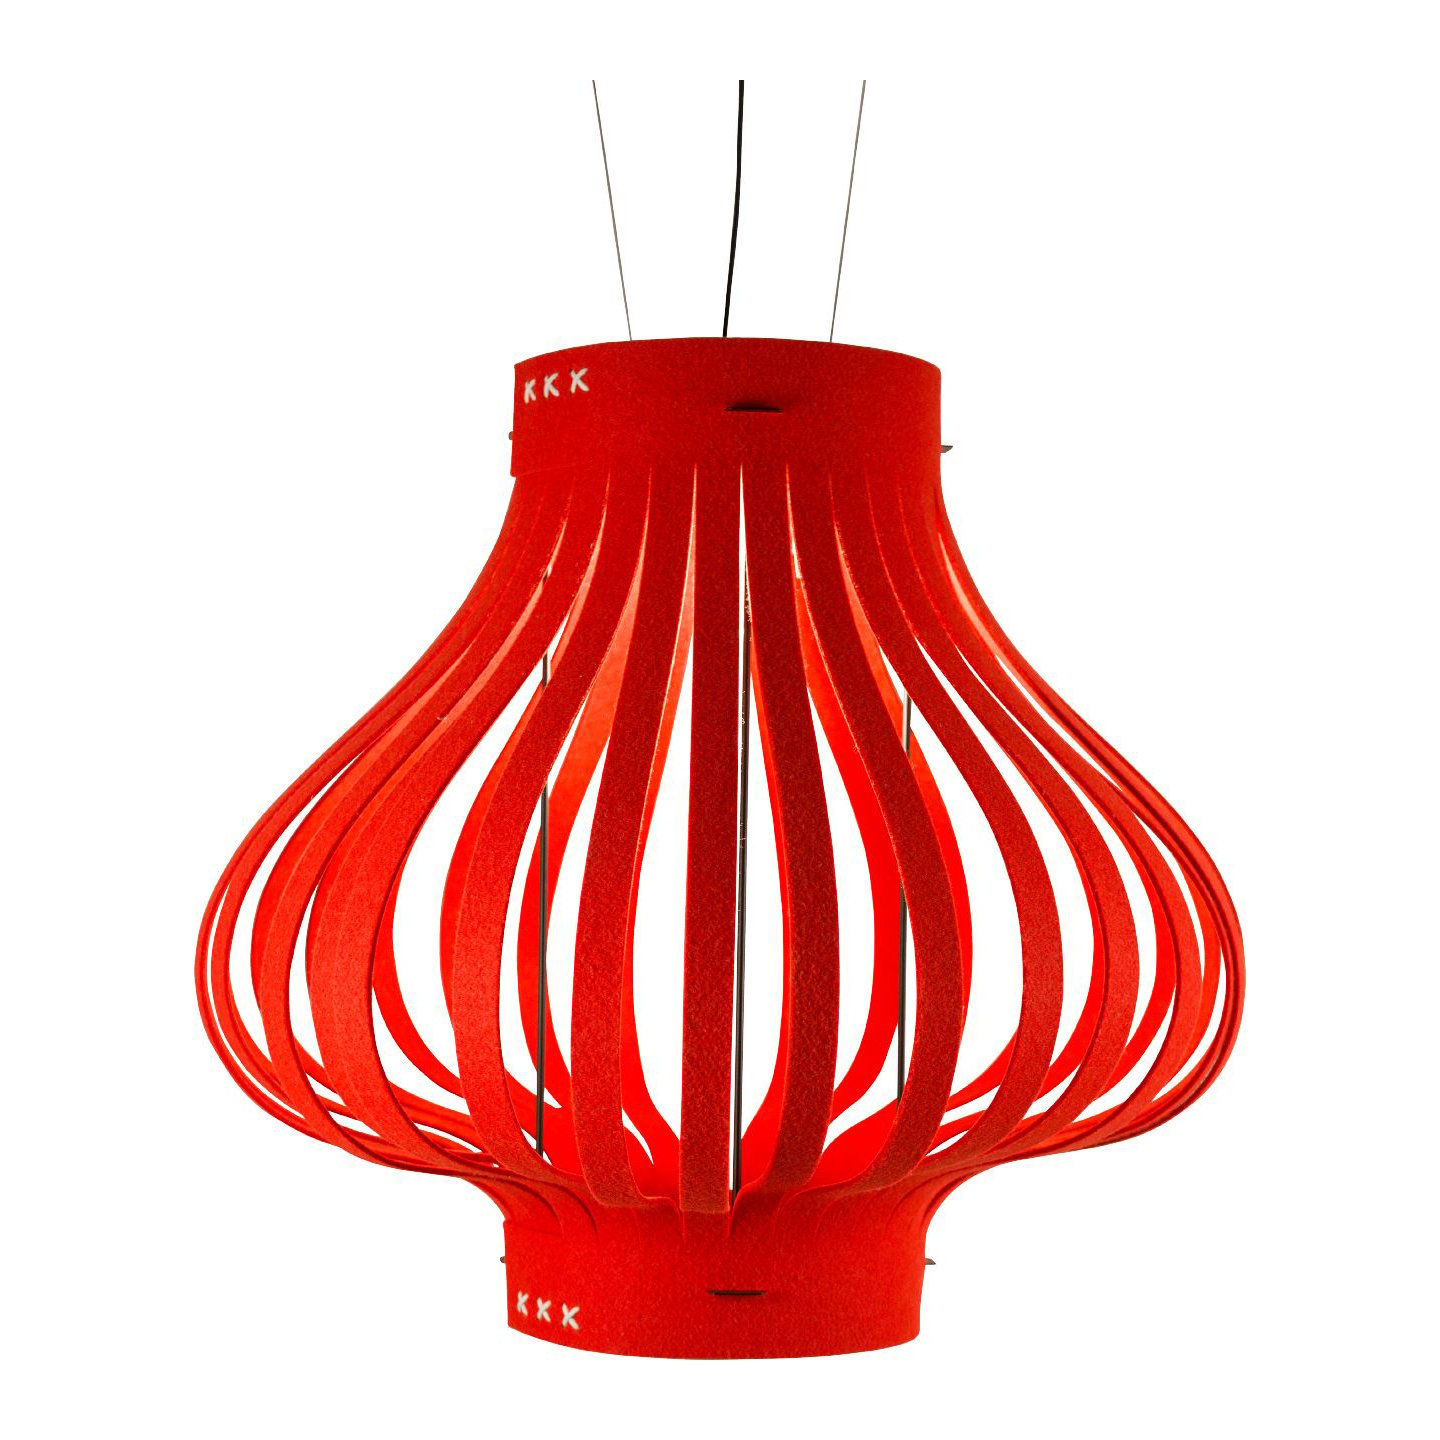 Haworth Buzzilight Mono Lighting in a bright red color with open light space